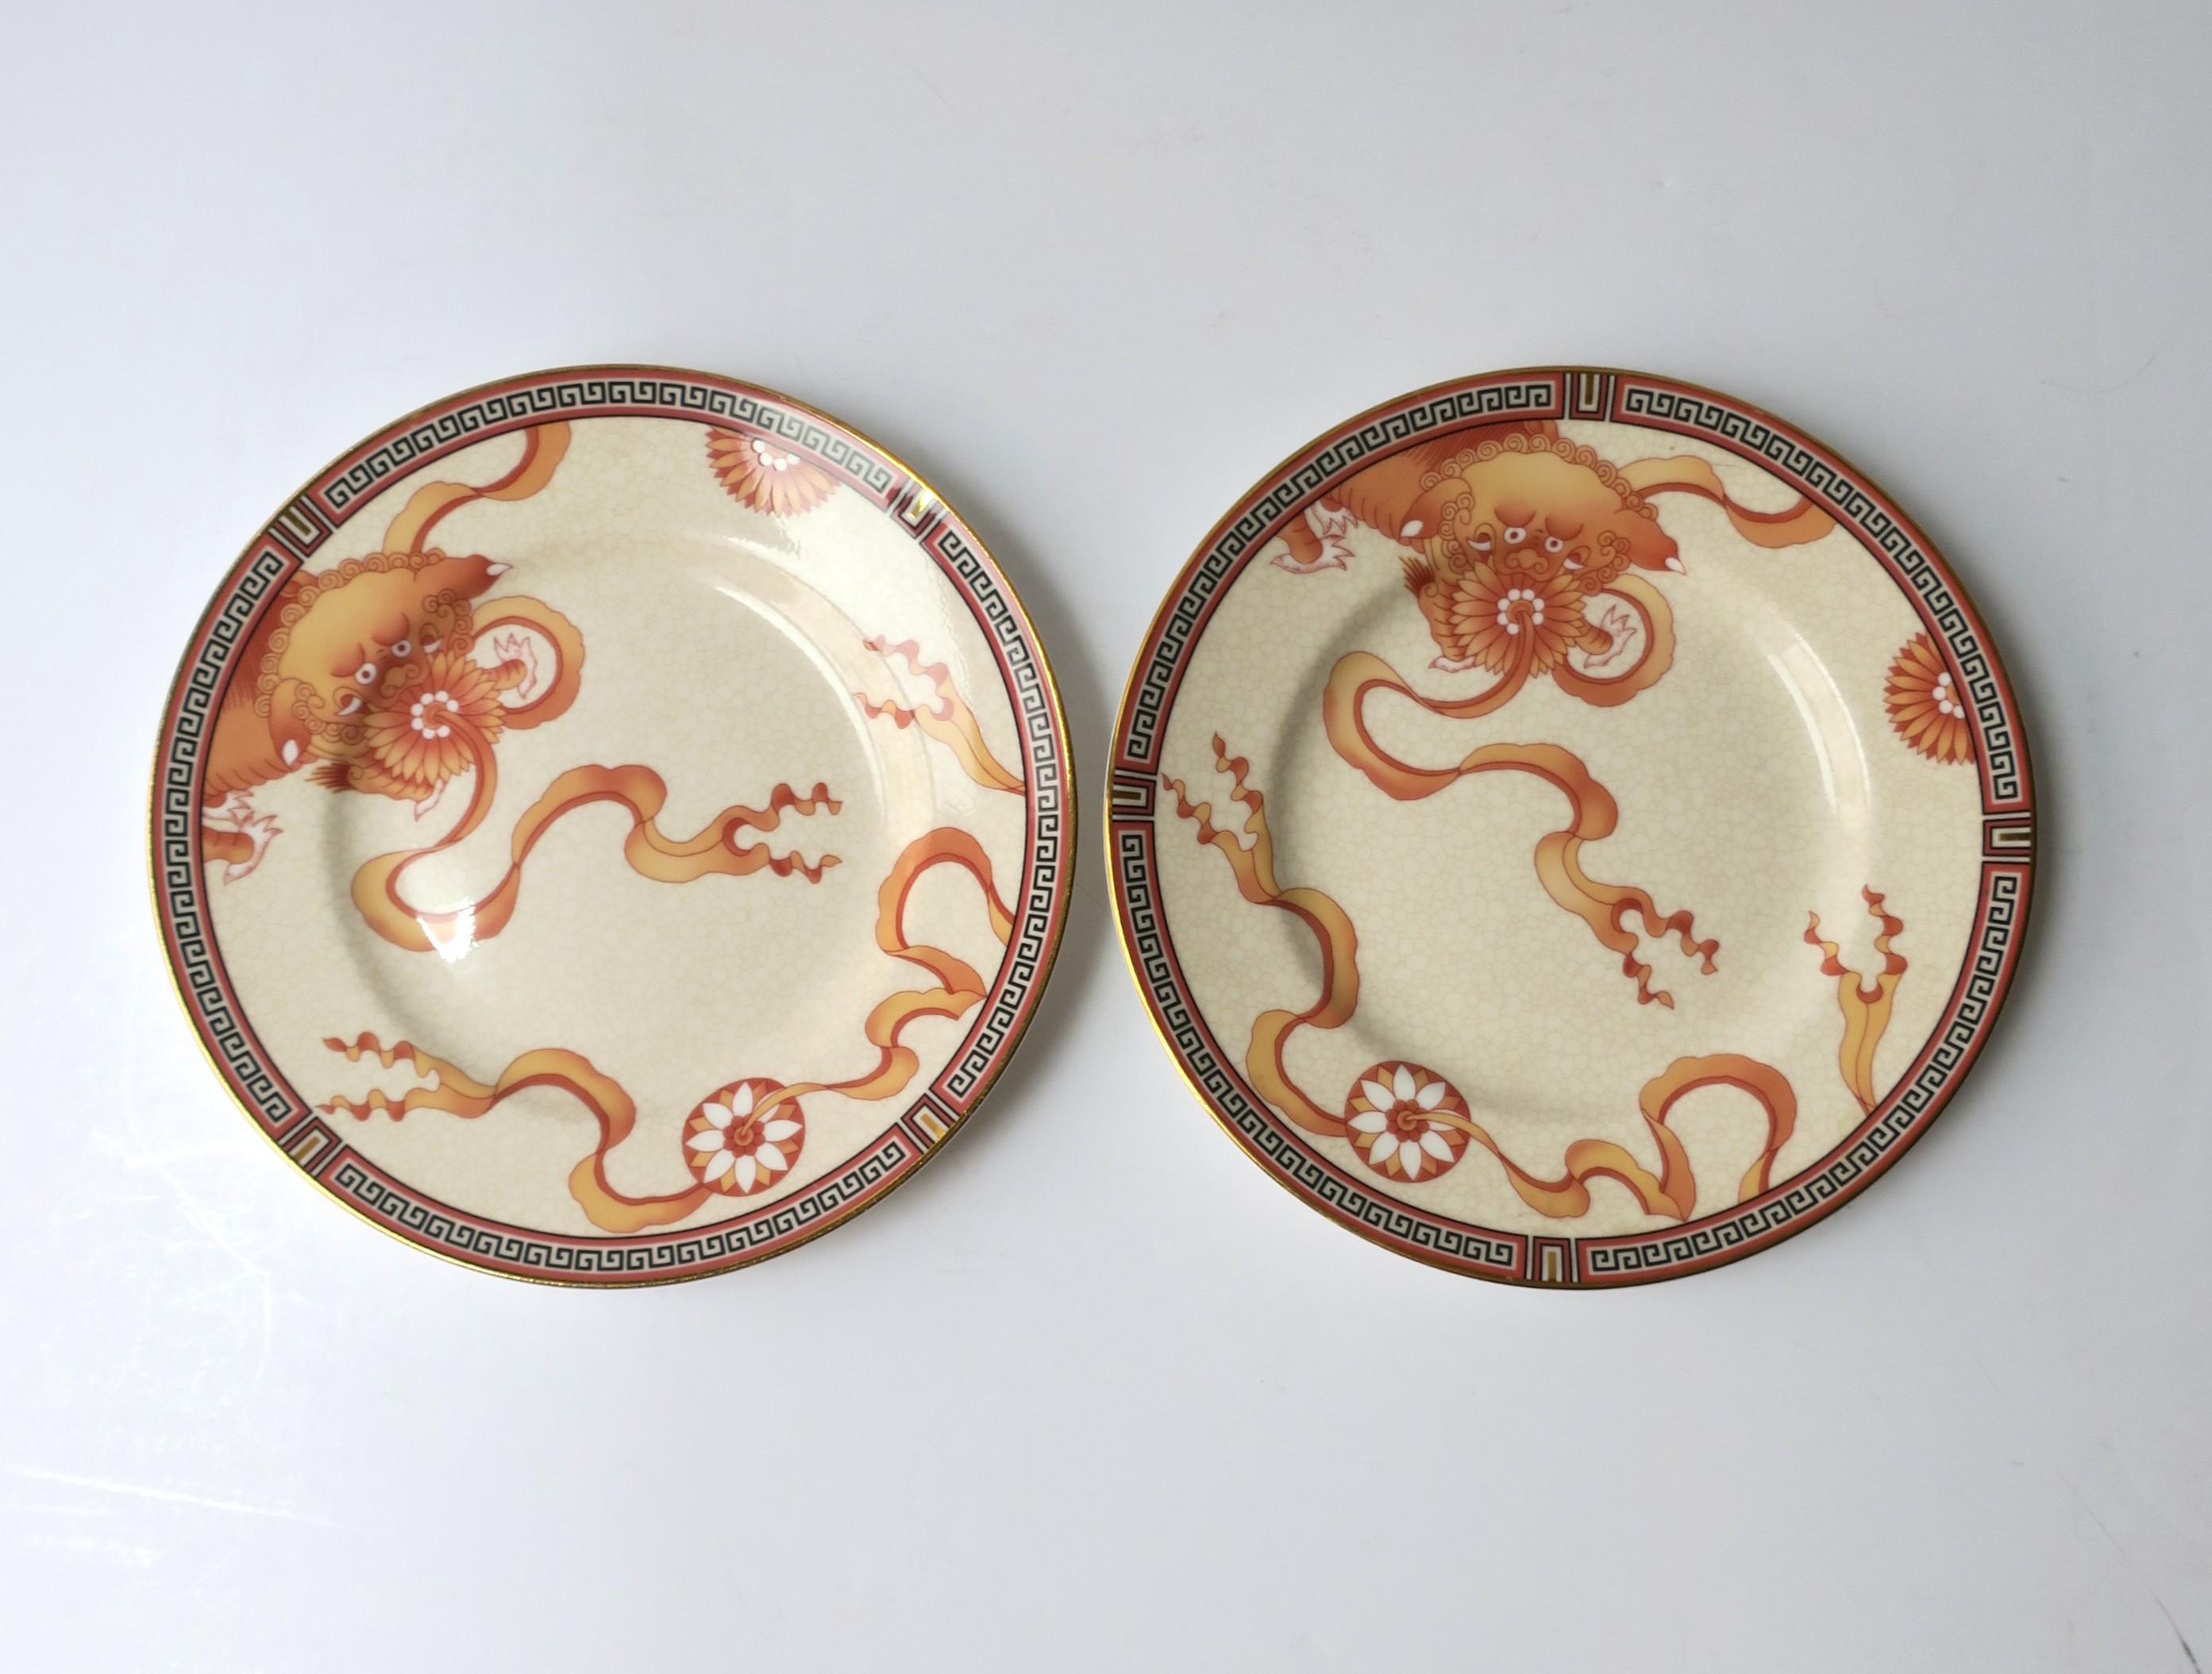 Wedgwood Dynasty Porcelain Plates, Set of 2 In Good Condition For Sale In New York, NY